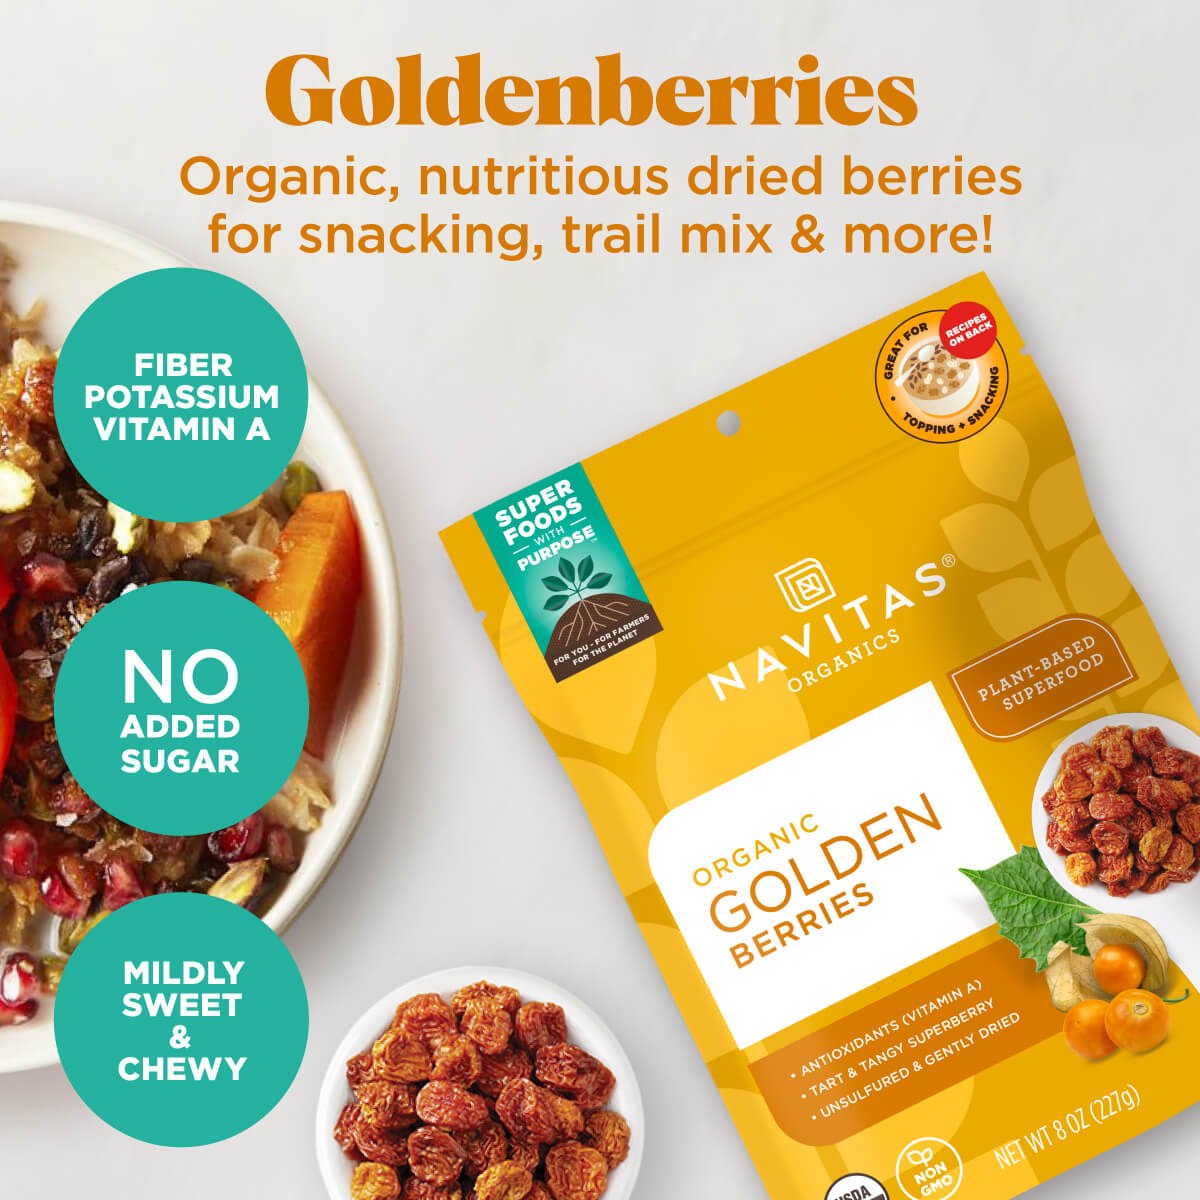 Organic Dried Fruit, Goldenberries, 8 oz at Whole Foods Market